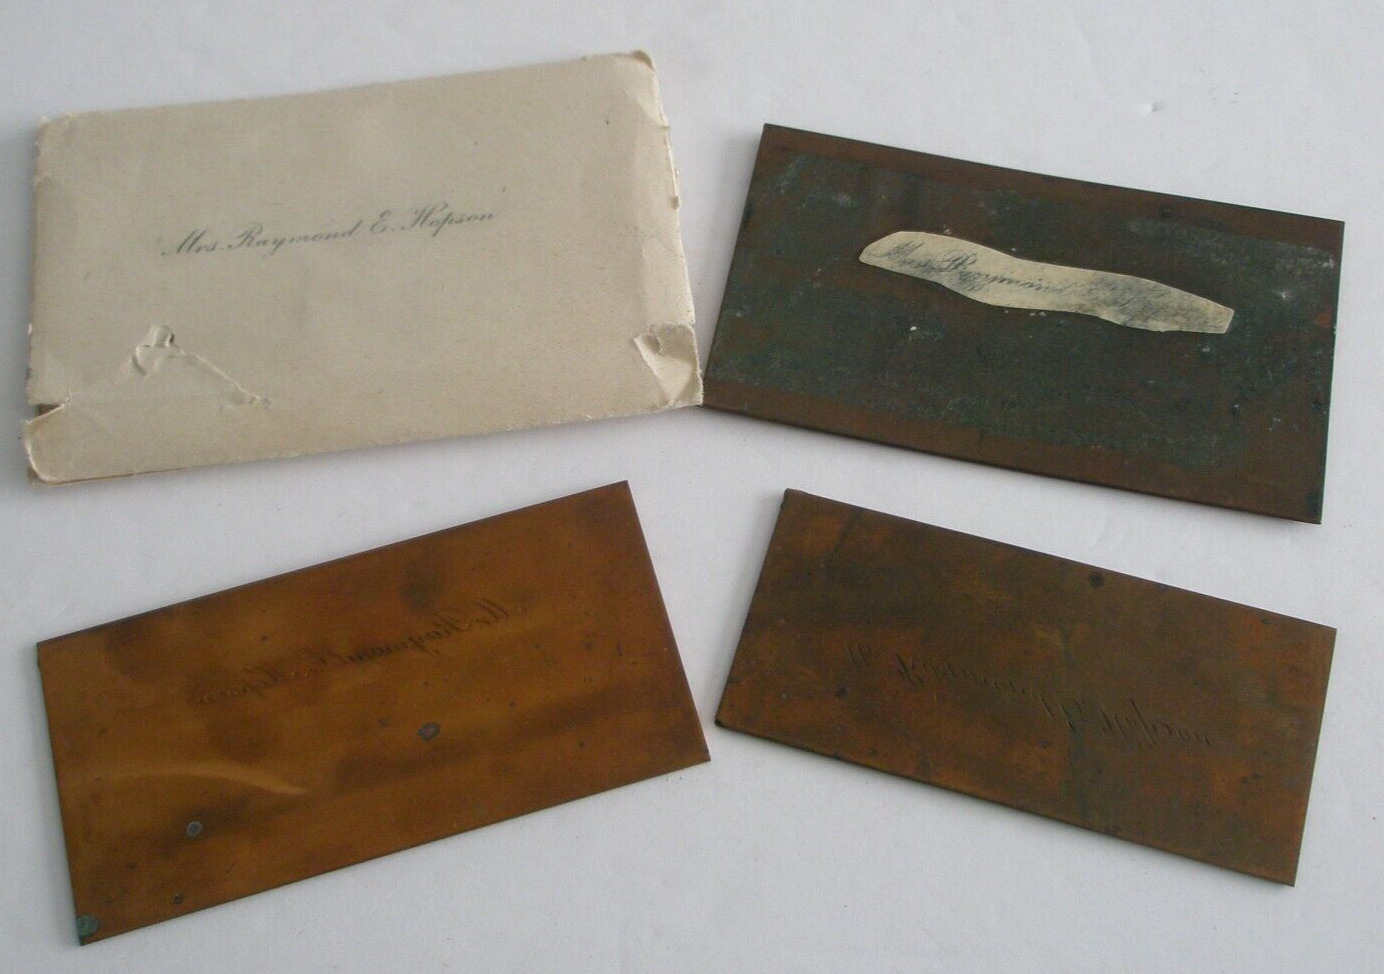 3 Antique Copper Engraved Calling Card/Business Card Engraved Printing Plate